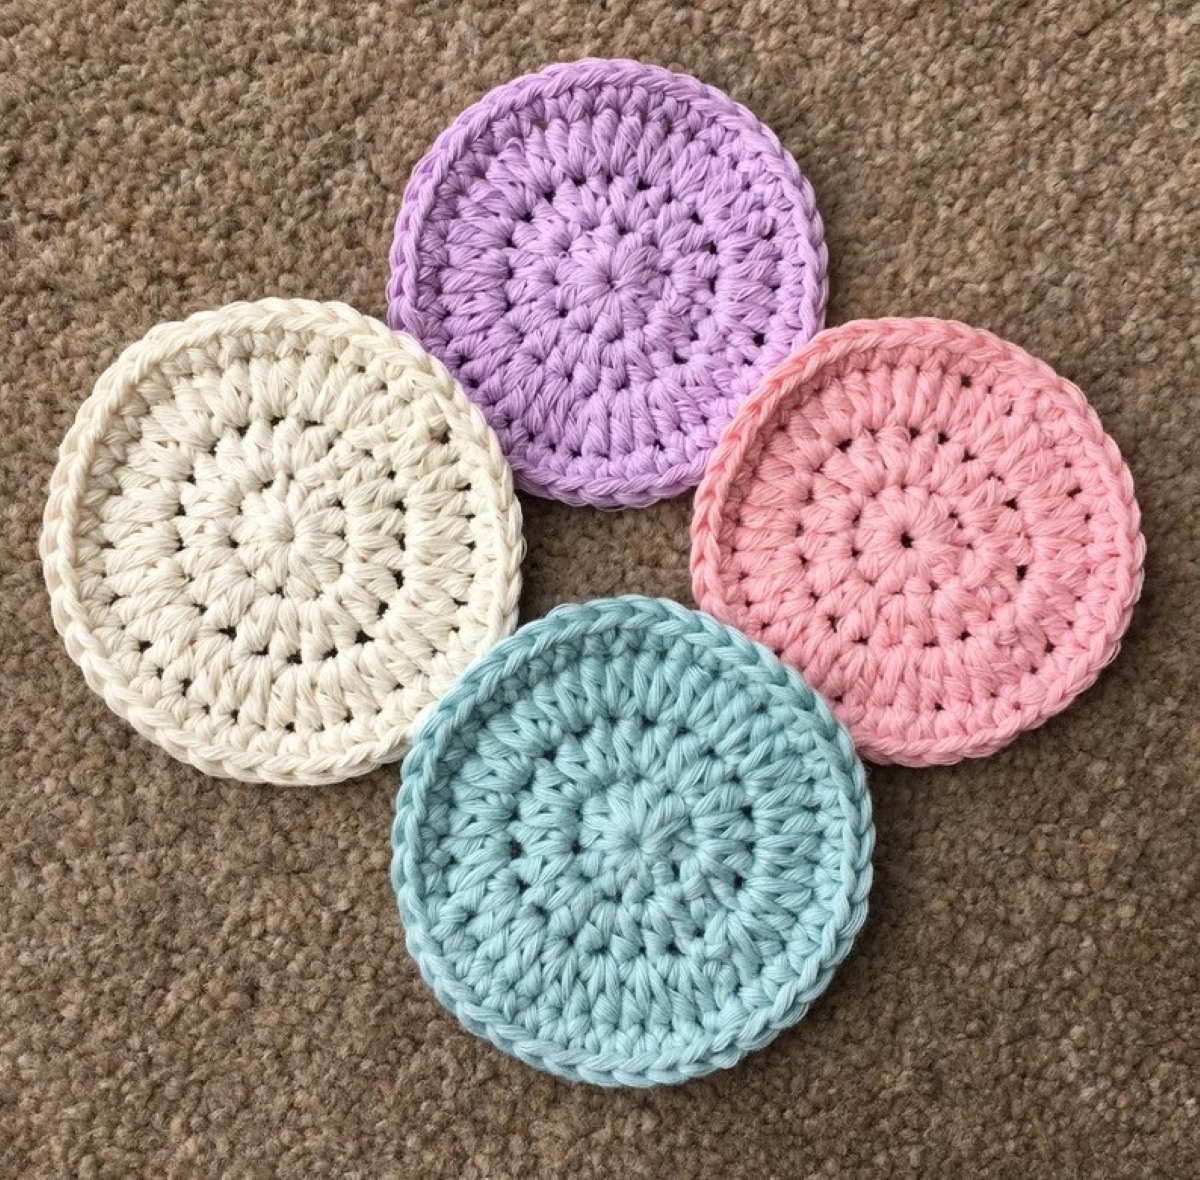 crochet patterns for beginners - colorful crochet face pads